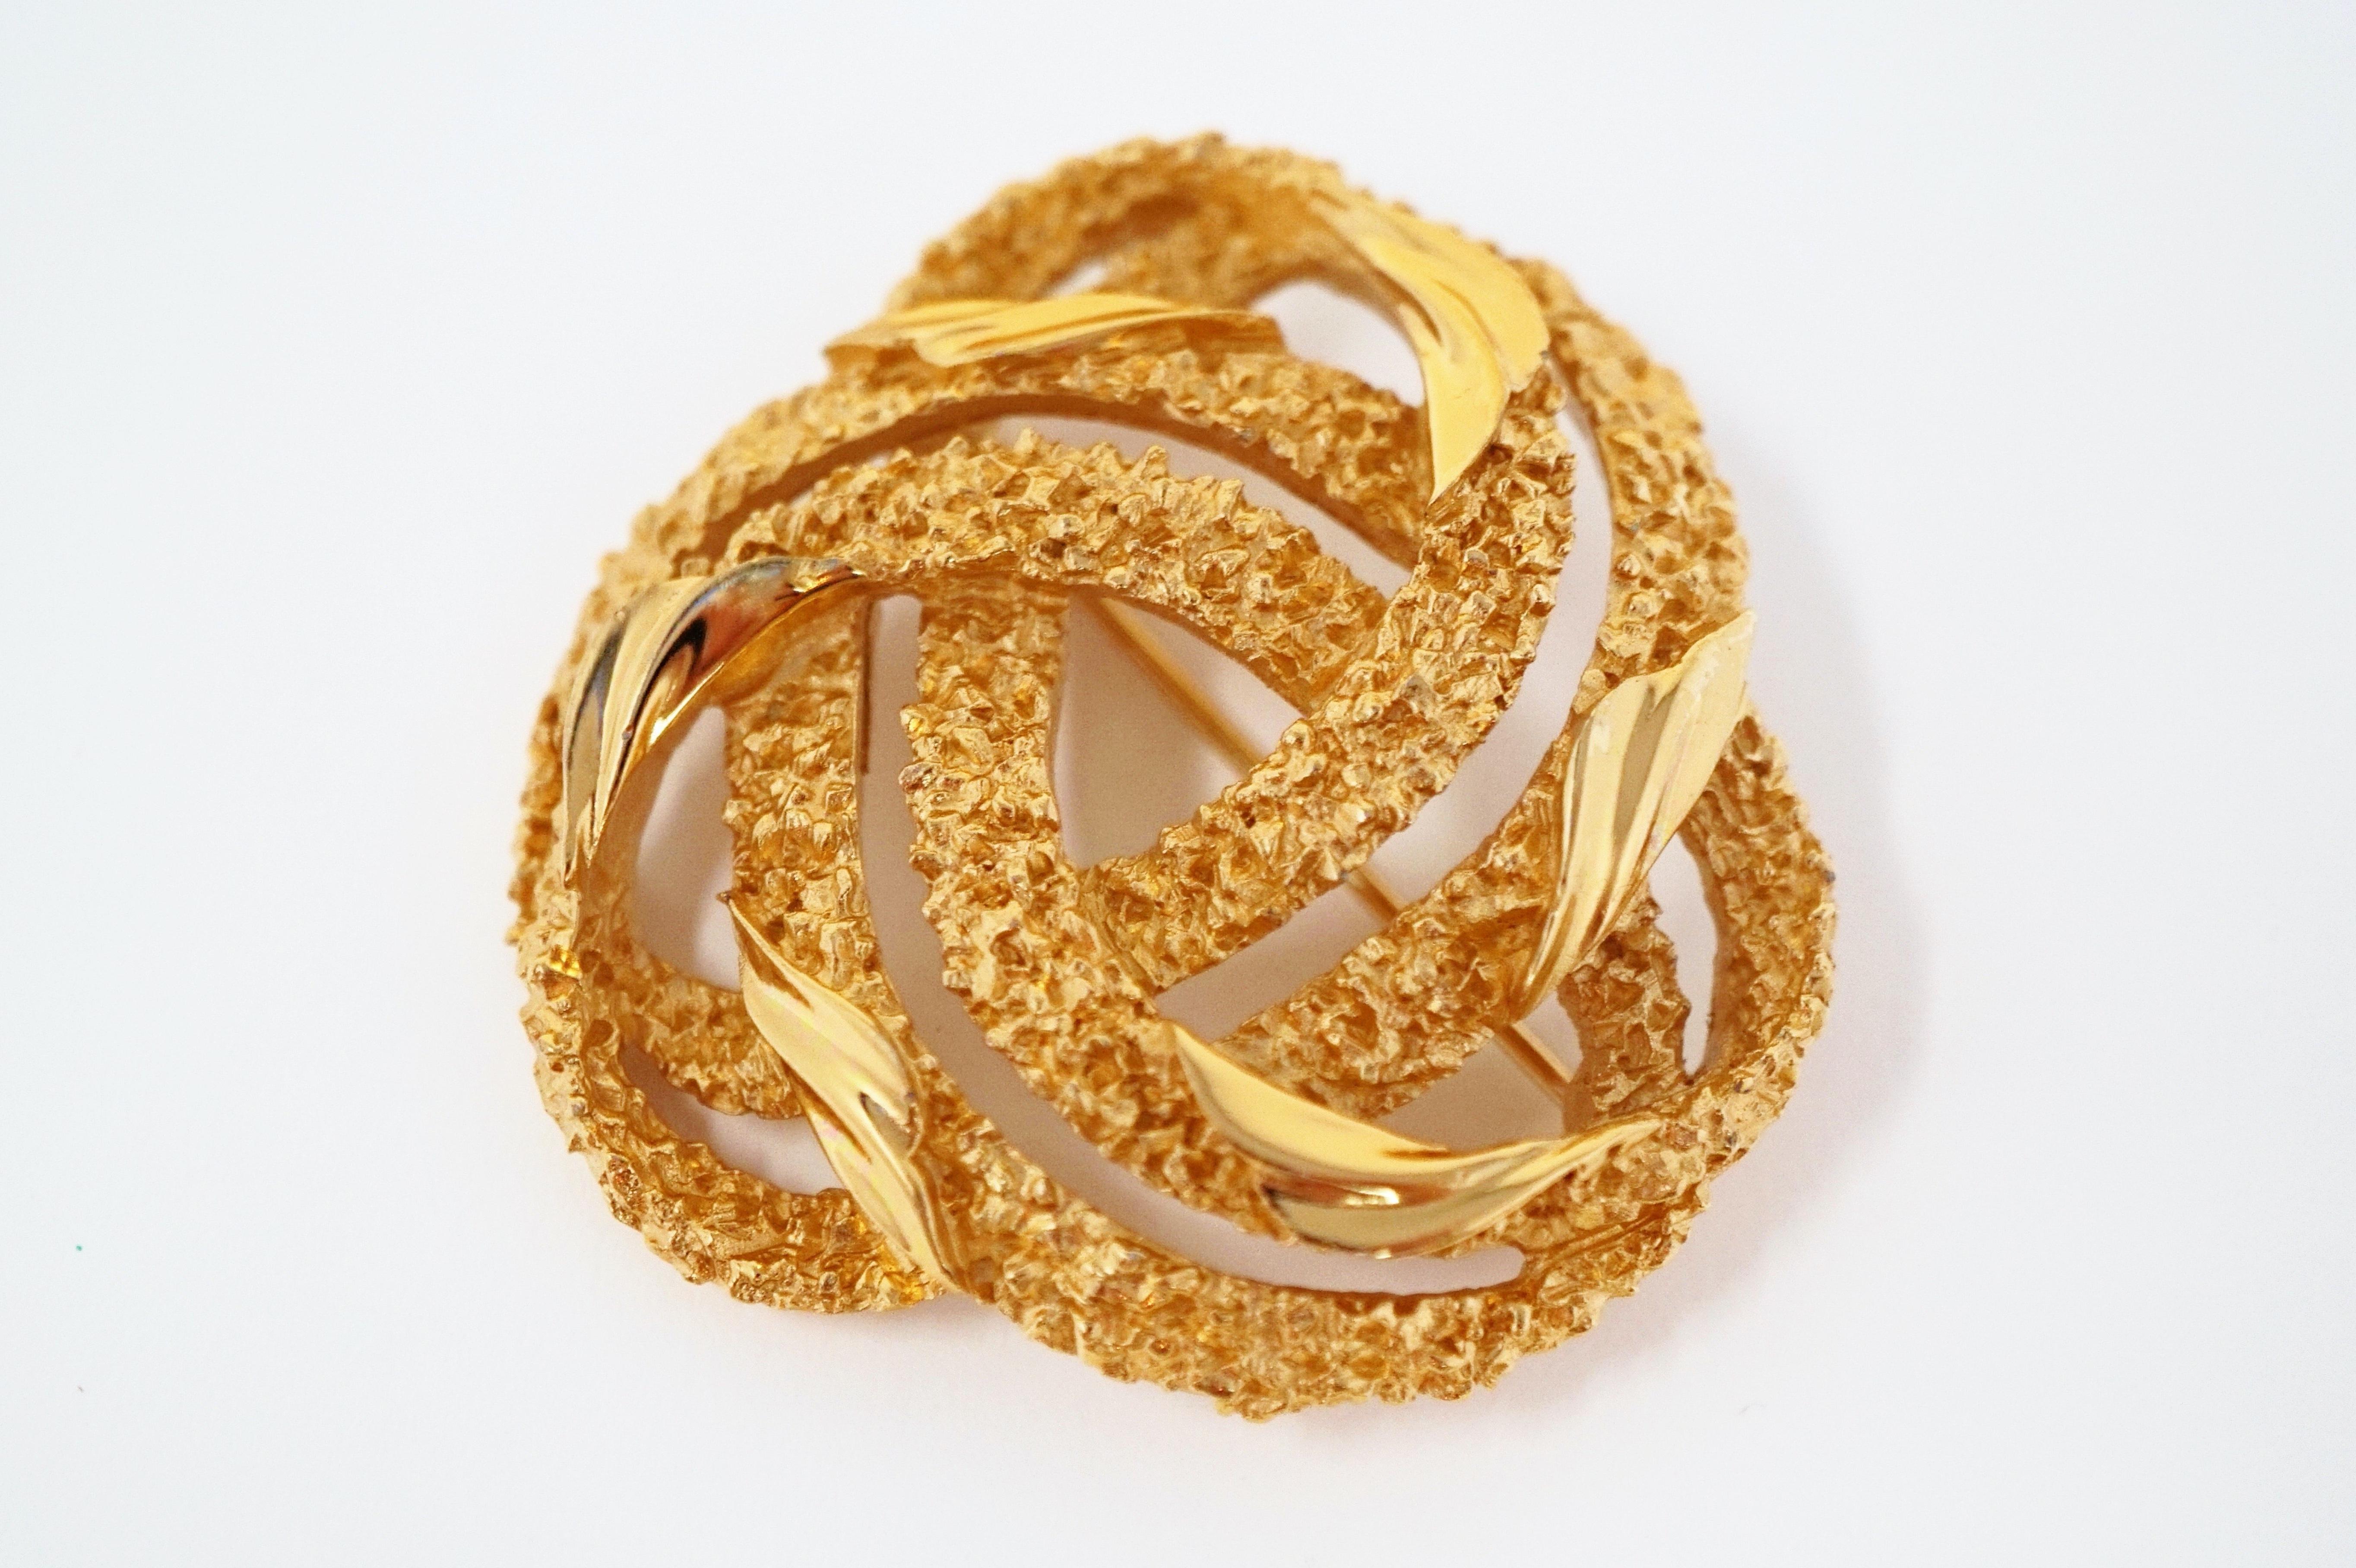 Crown Trifari Gilded Abstract Brutalist Textured Brooch, circa 1960s 1